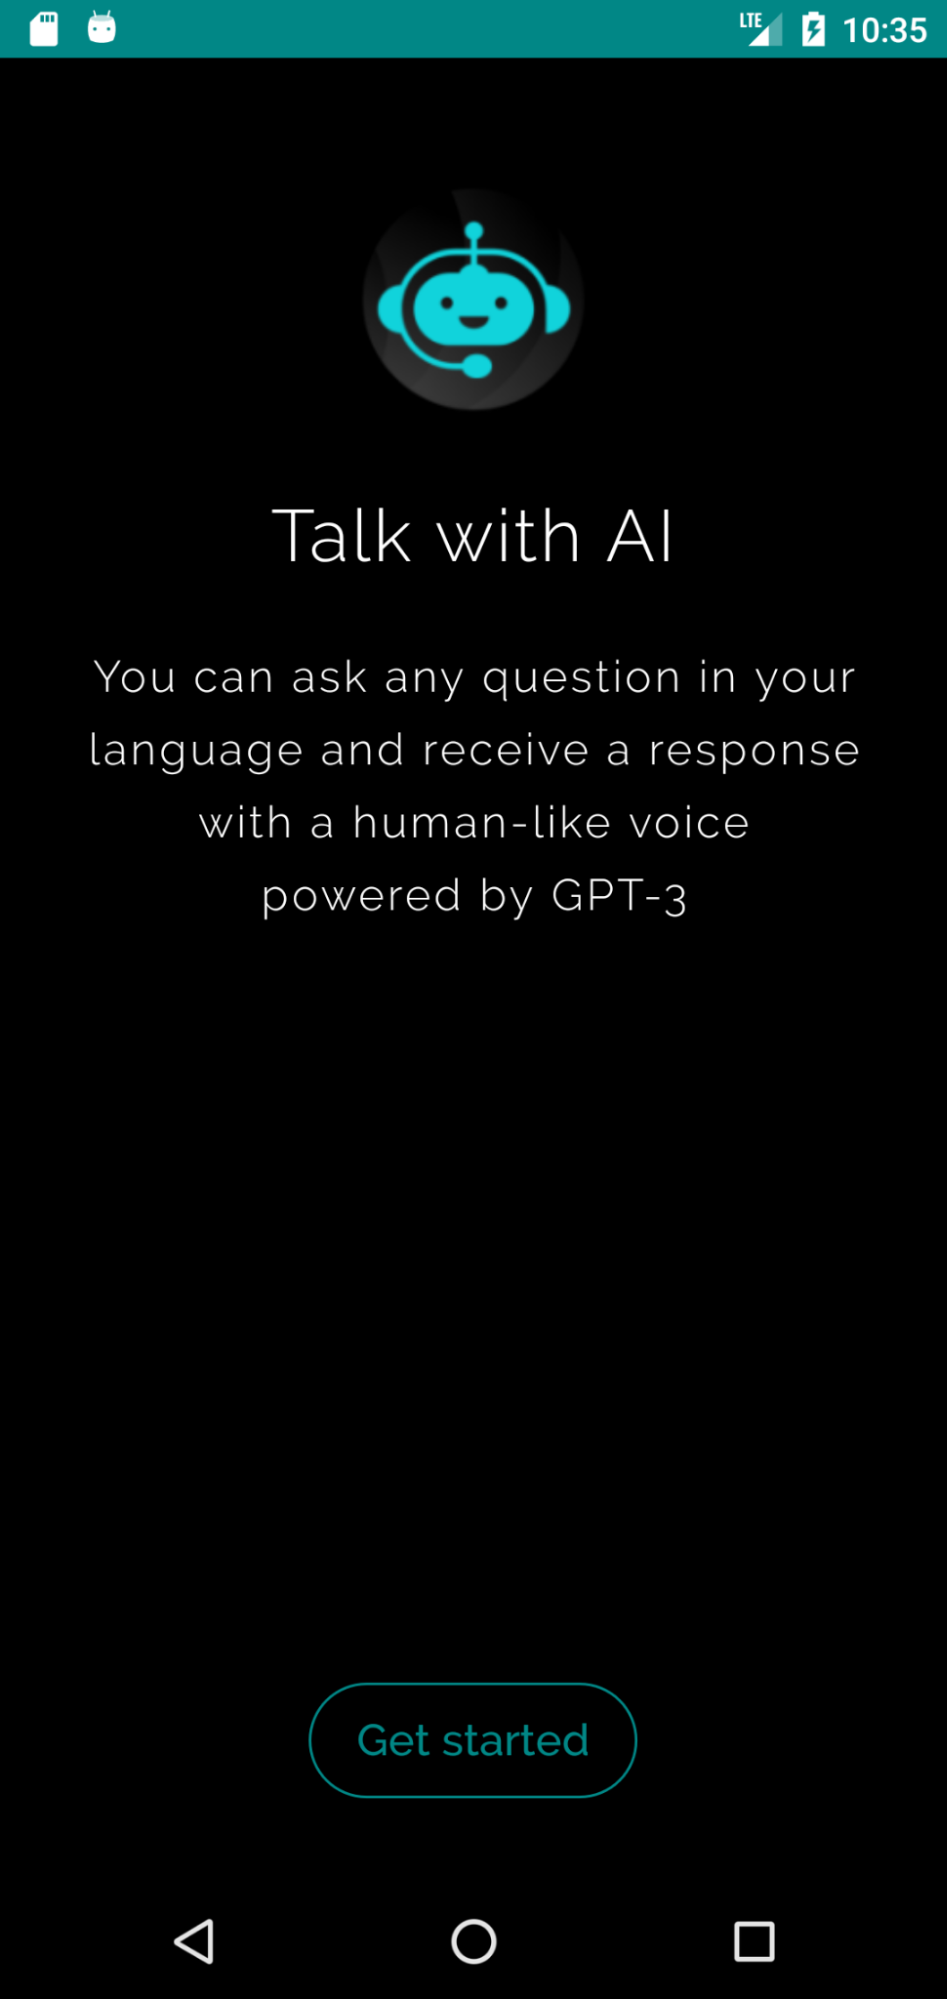 Image 2 is a screenshot of the SuperGPT app. The SuperGPT logo appears on top with the header “Talk with AI” followed by the text, “You can ask any question in your language and receive a response with a human-like voice powered by GPT-3.” At the bottom there is a button that says get started.